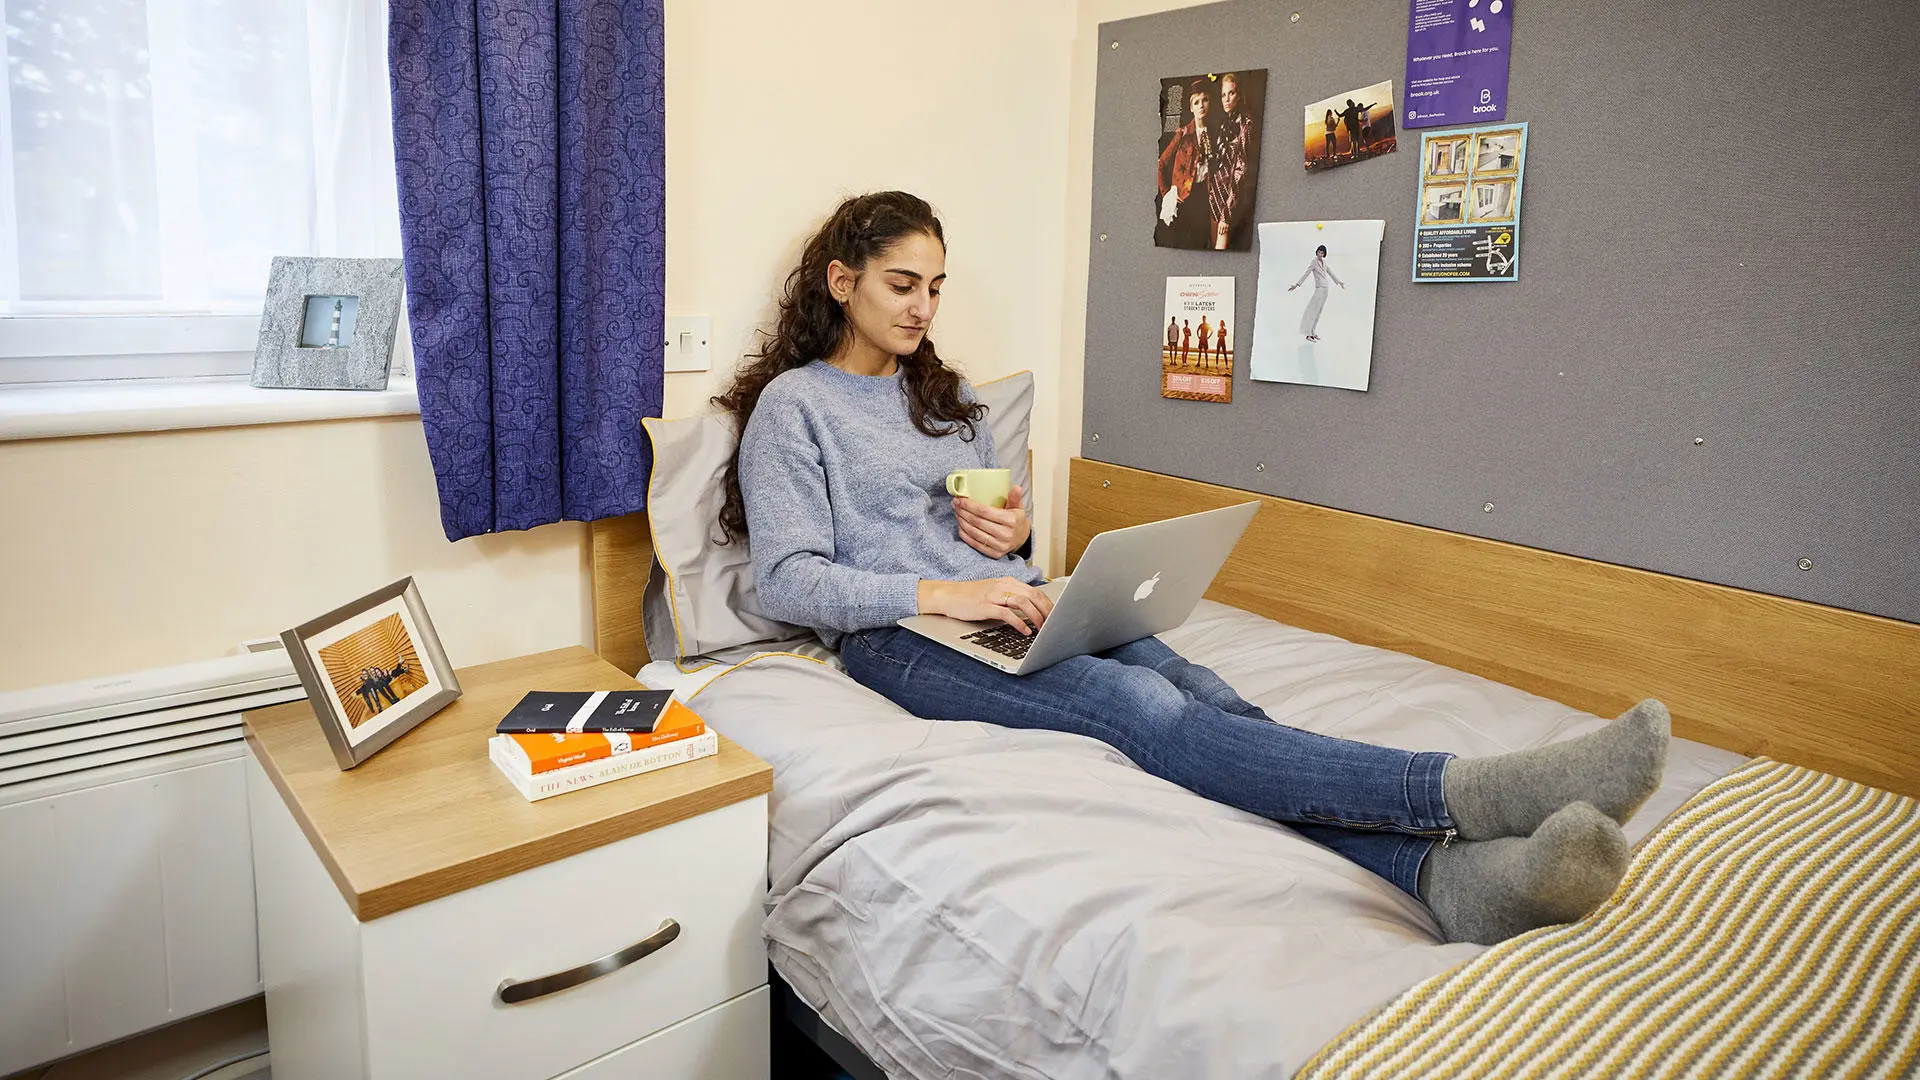 A female student sat on her bed in student accommodation looking at a laptop and holding a mug